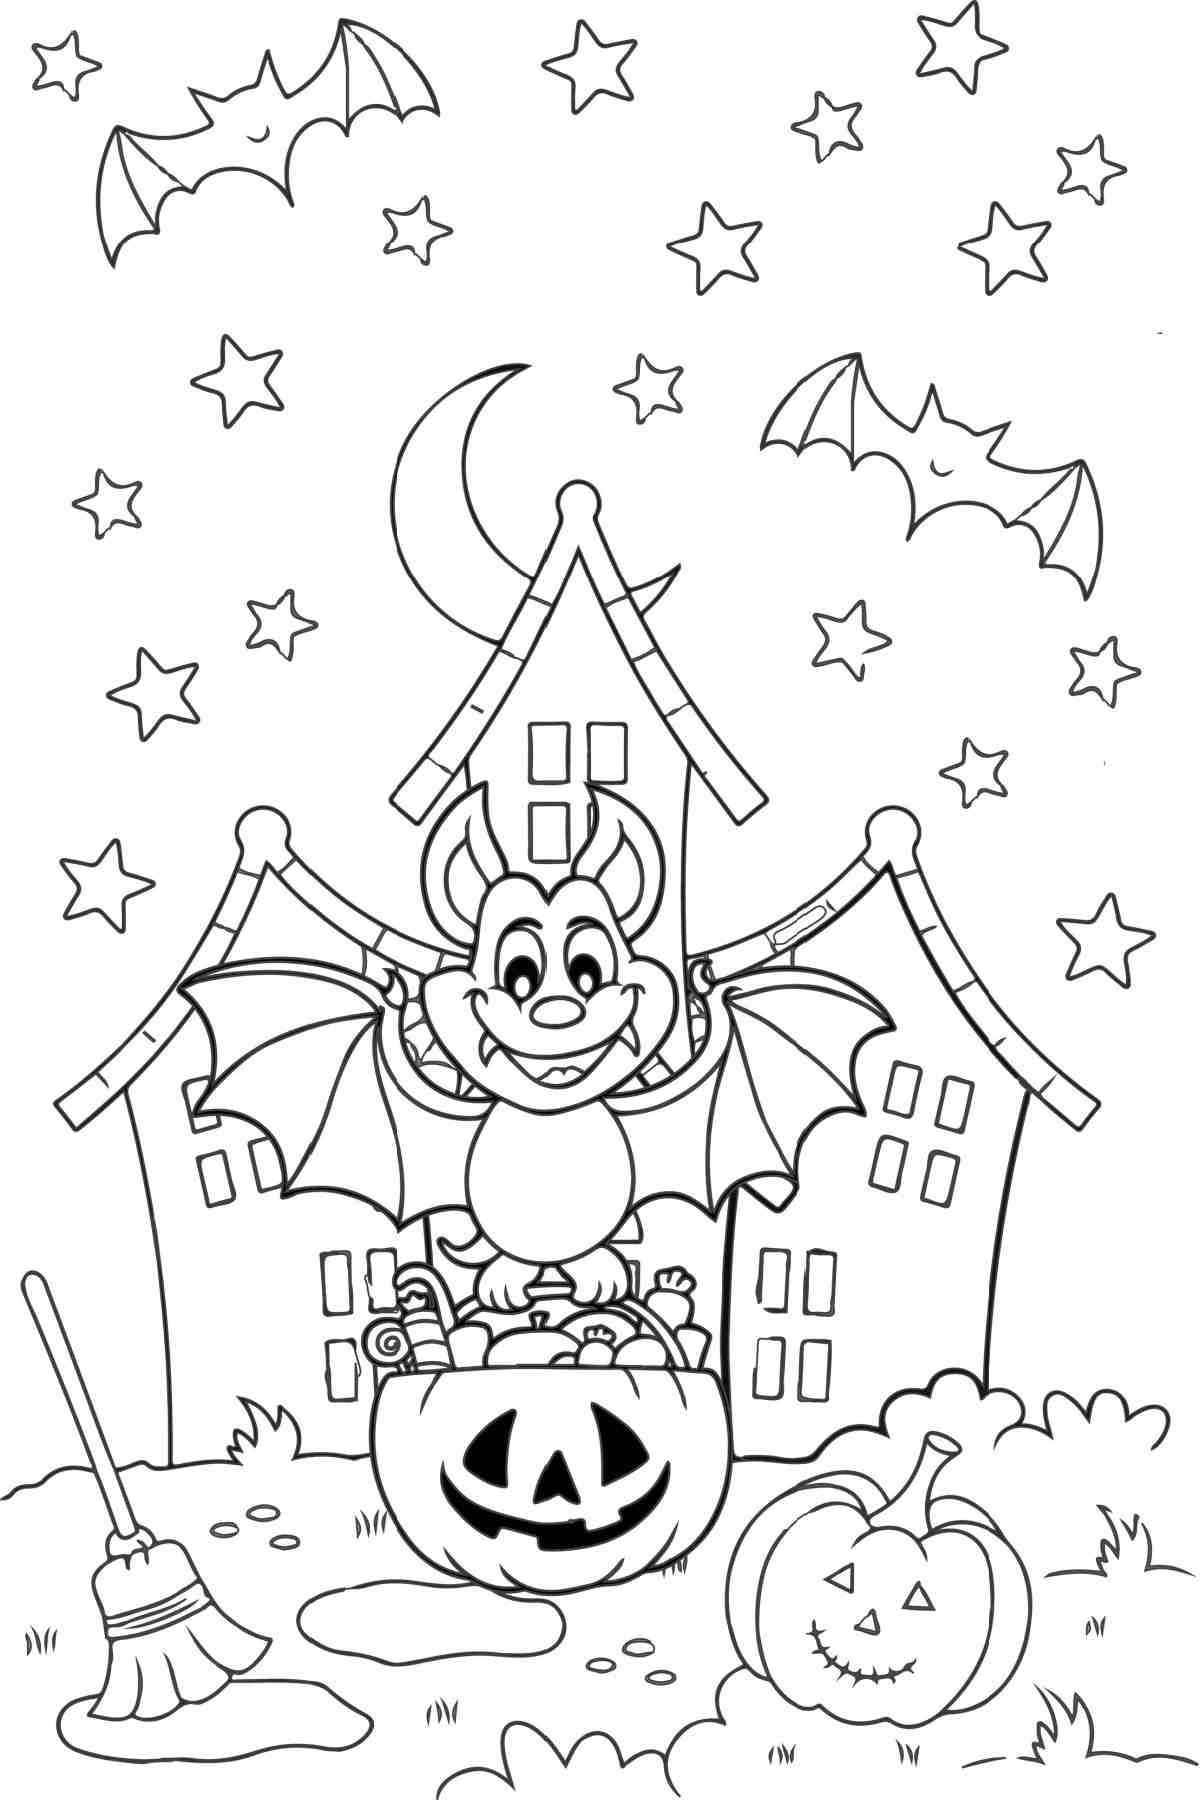 Halloween printable coloring pages depicting a castle on a hill at night, with a smiling bat holding a jack o lantern full of candy in front of it, with a moon, stars, and smaller bats above the castle in this free coloring page.